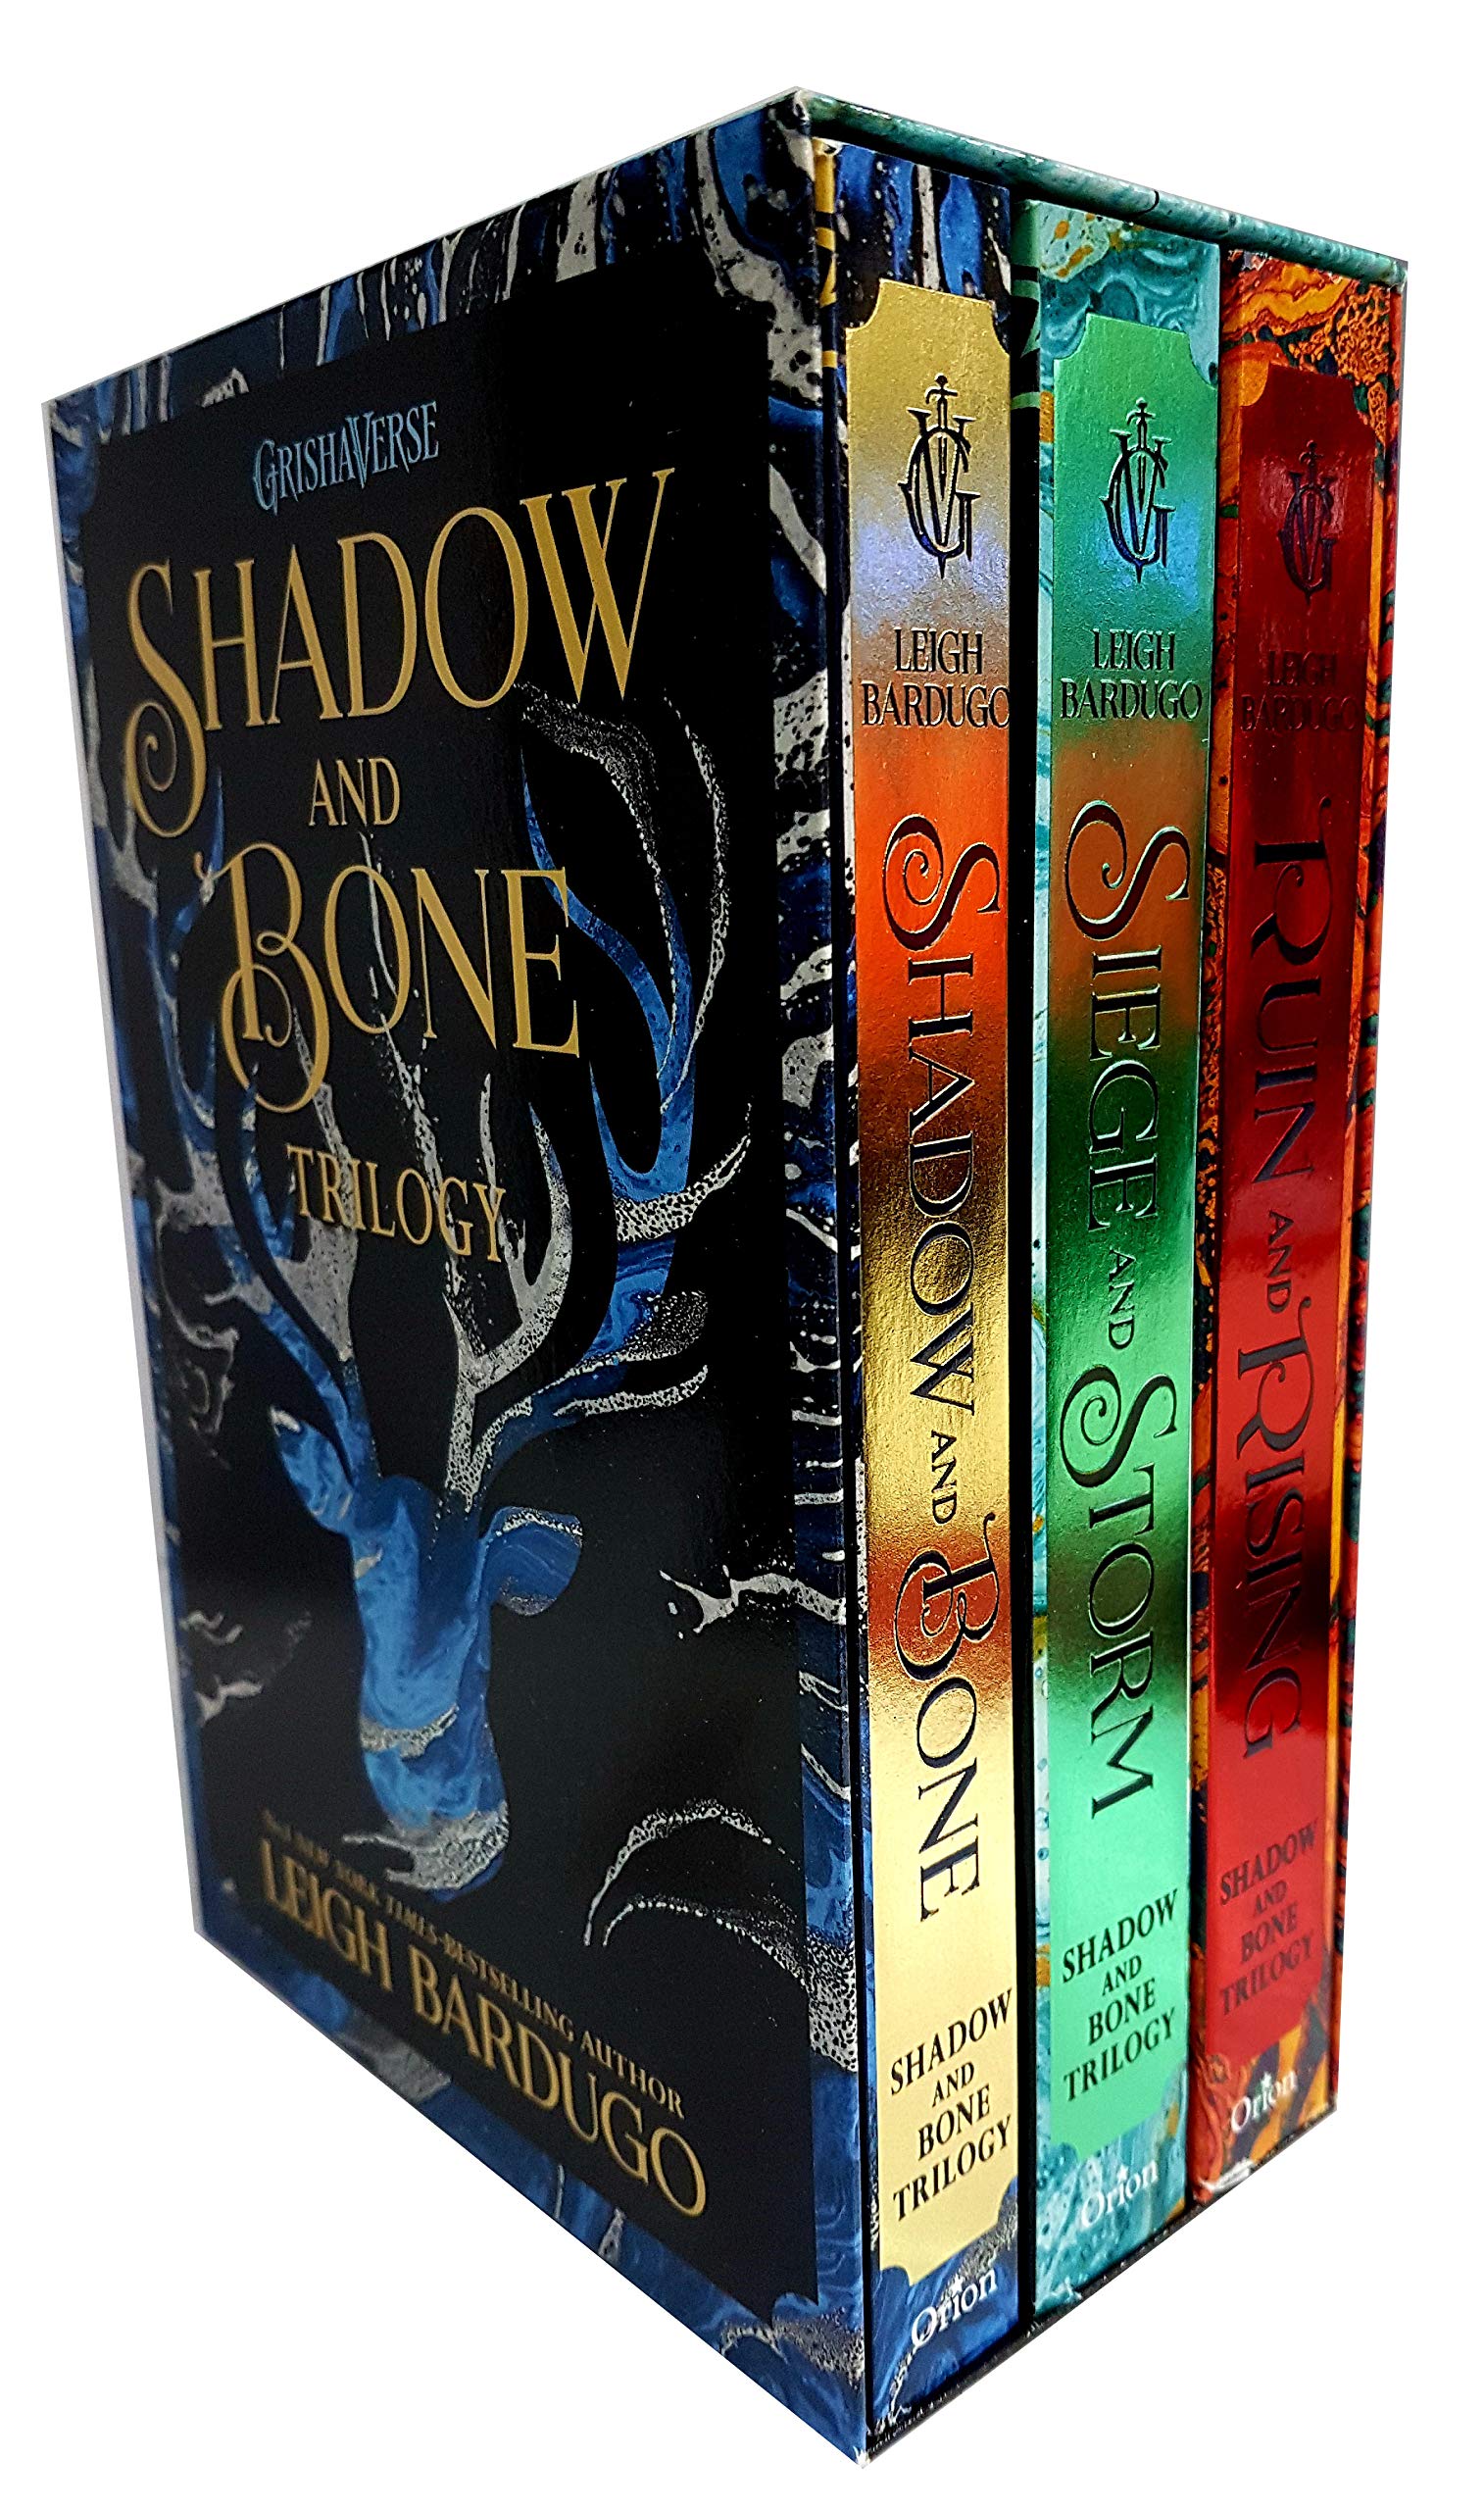 Shadow and Bone Trilogy leigh Bardugo Collection 3 Books Box Set Paperback - Lets Buy Books